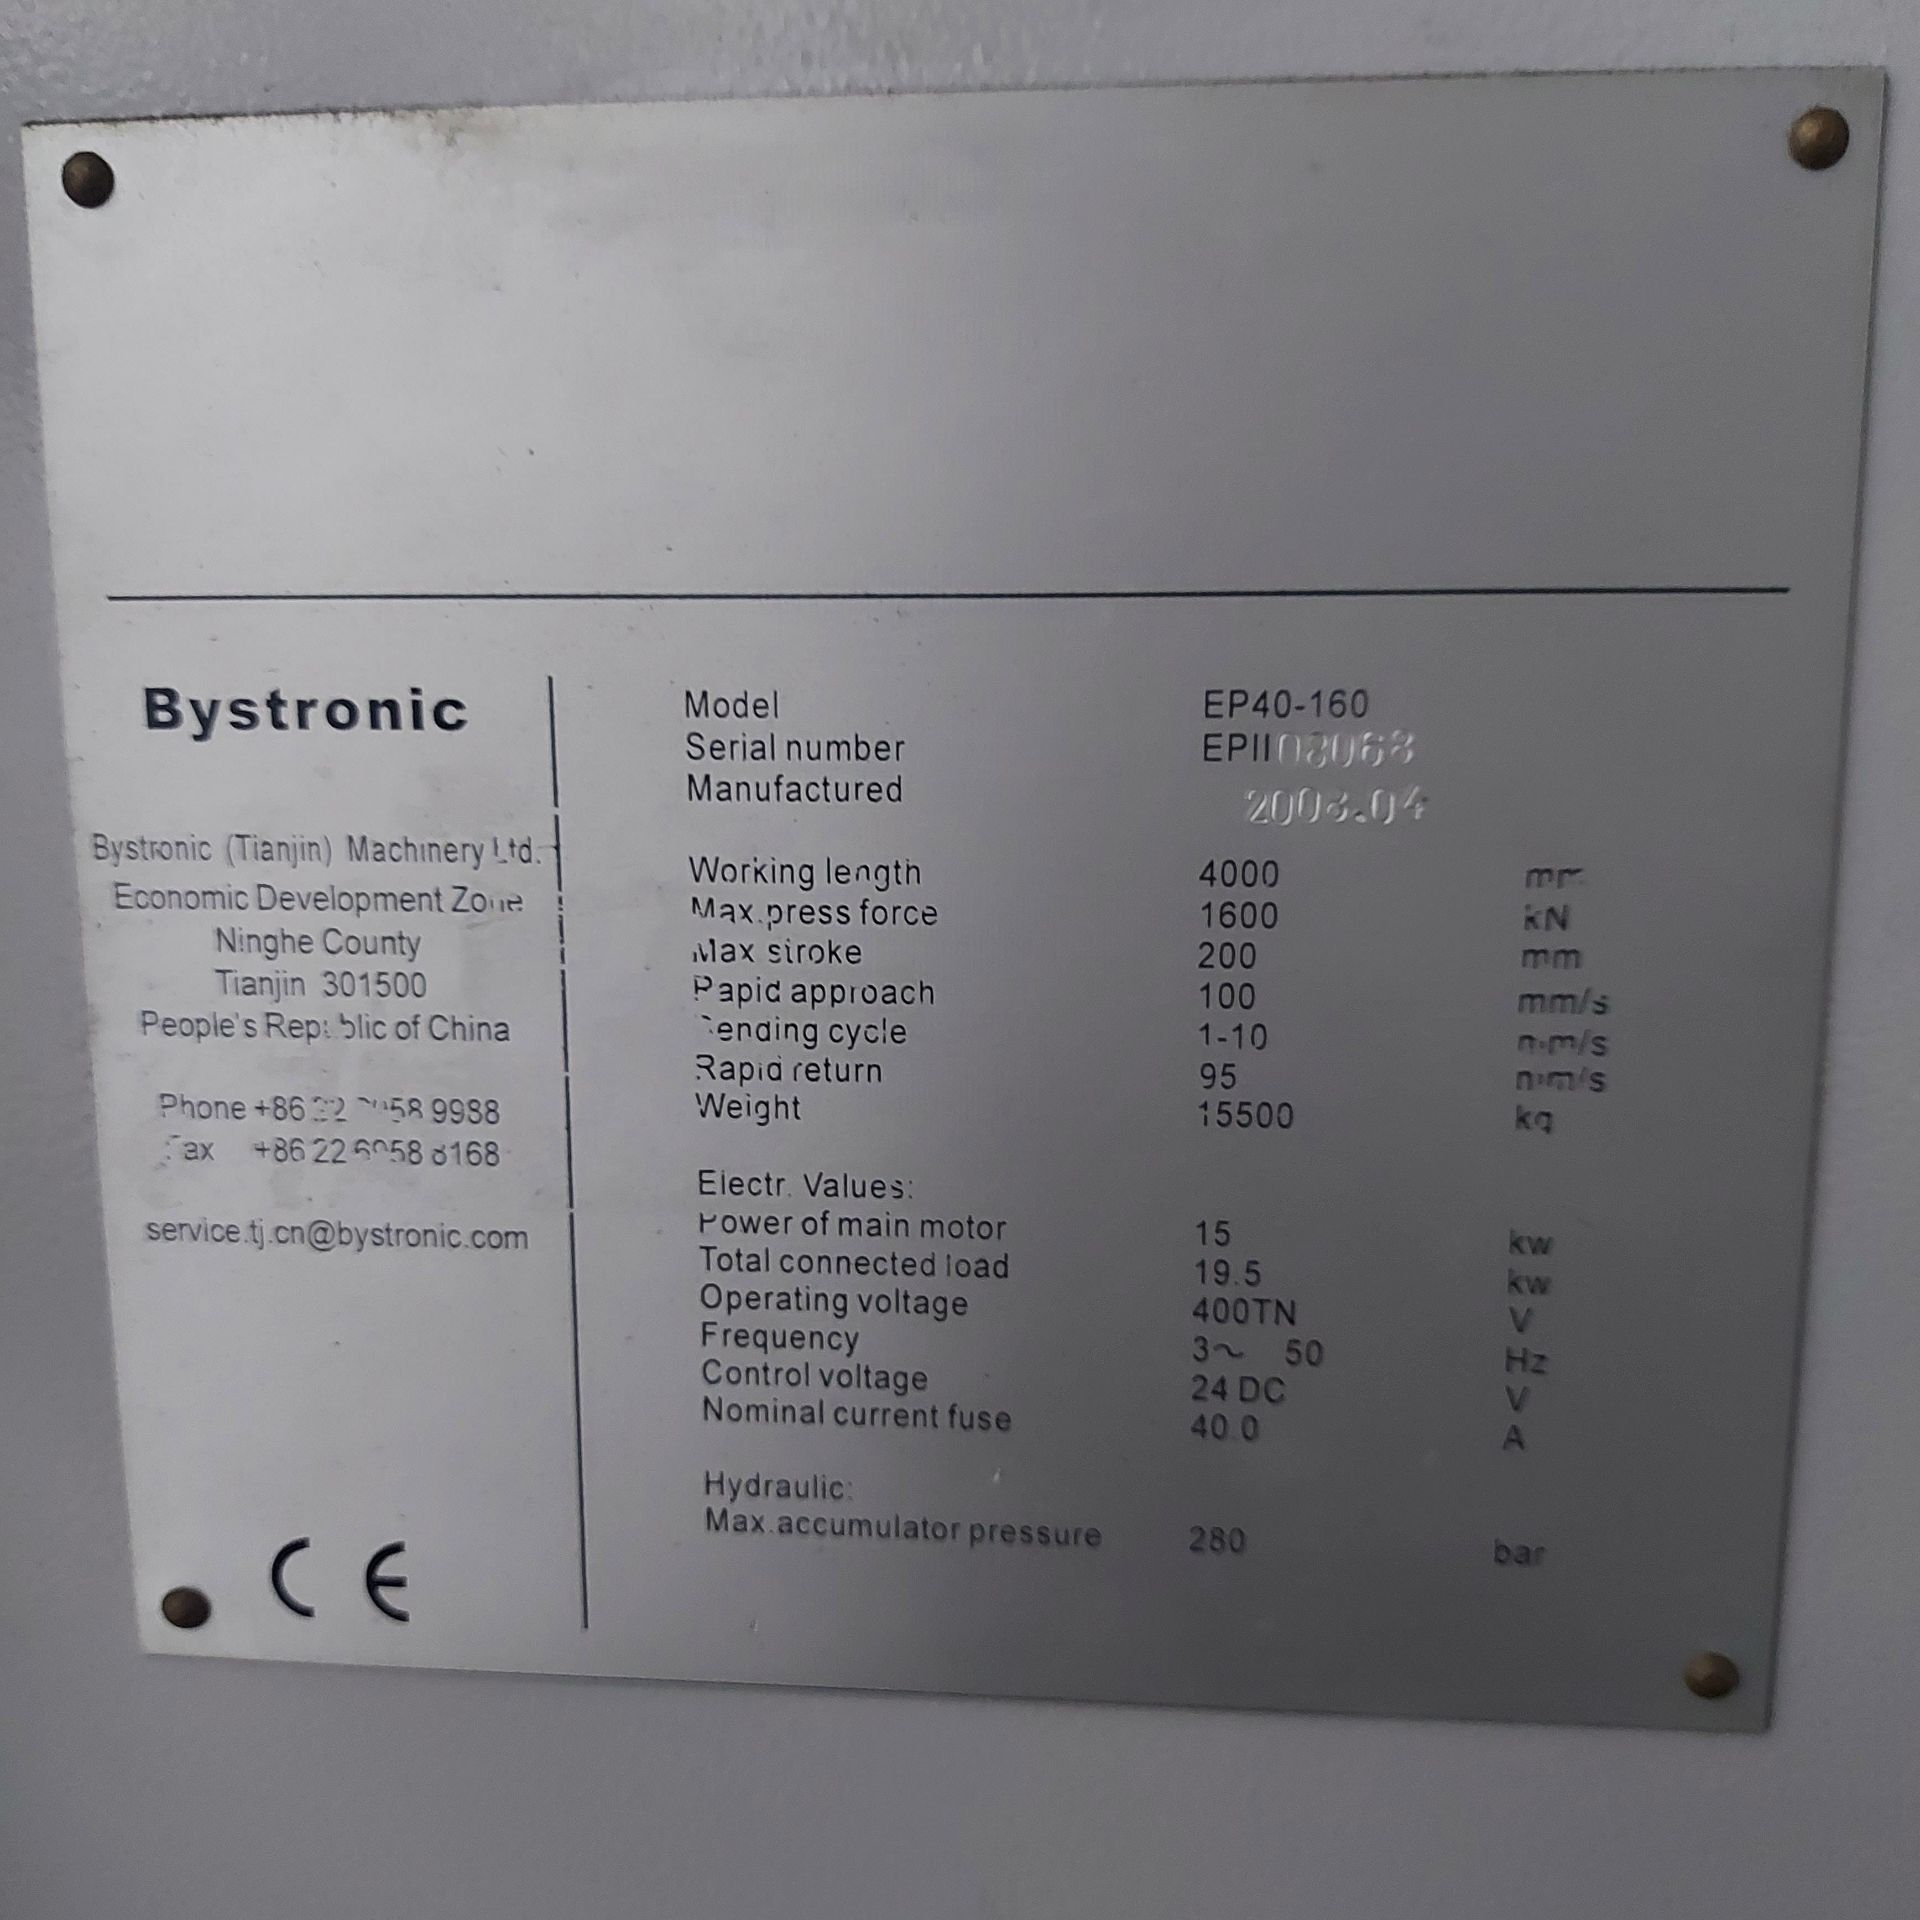 Bystronic AFM-EP2 160 CNC Down Stroking Hydraulic Press Brake Model EP40-160, Year 2008 - Image 4 of 20